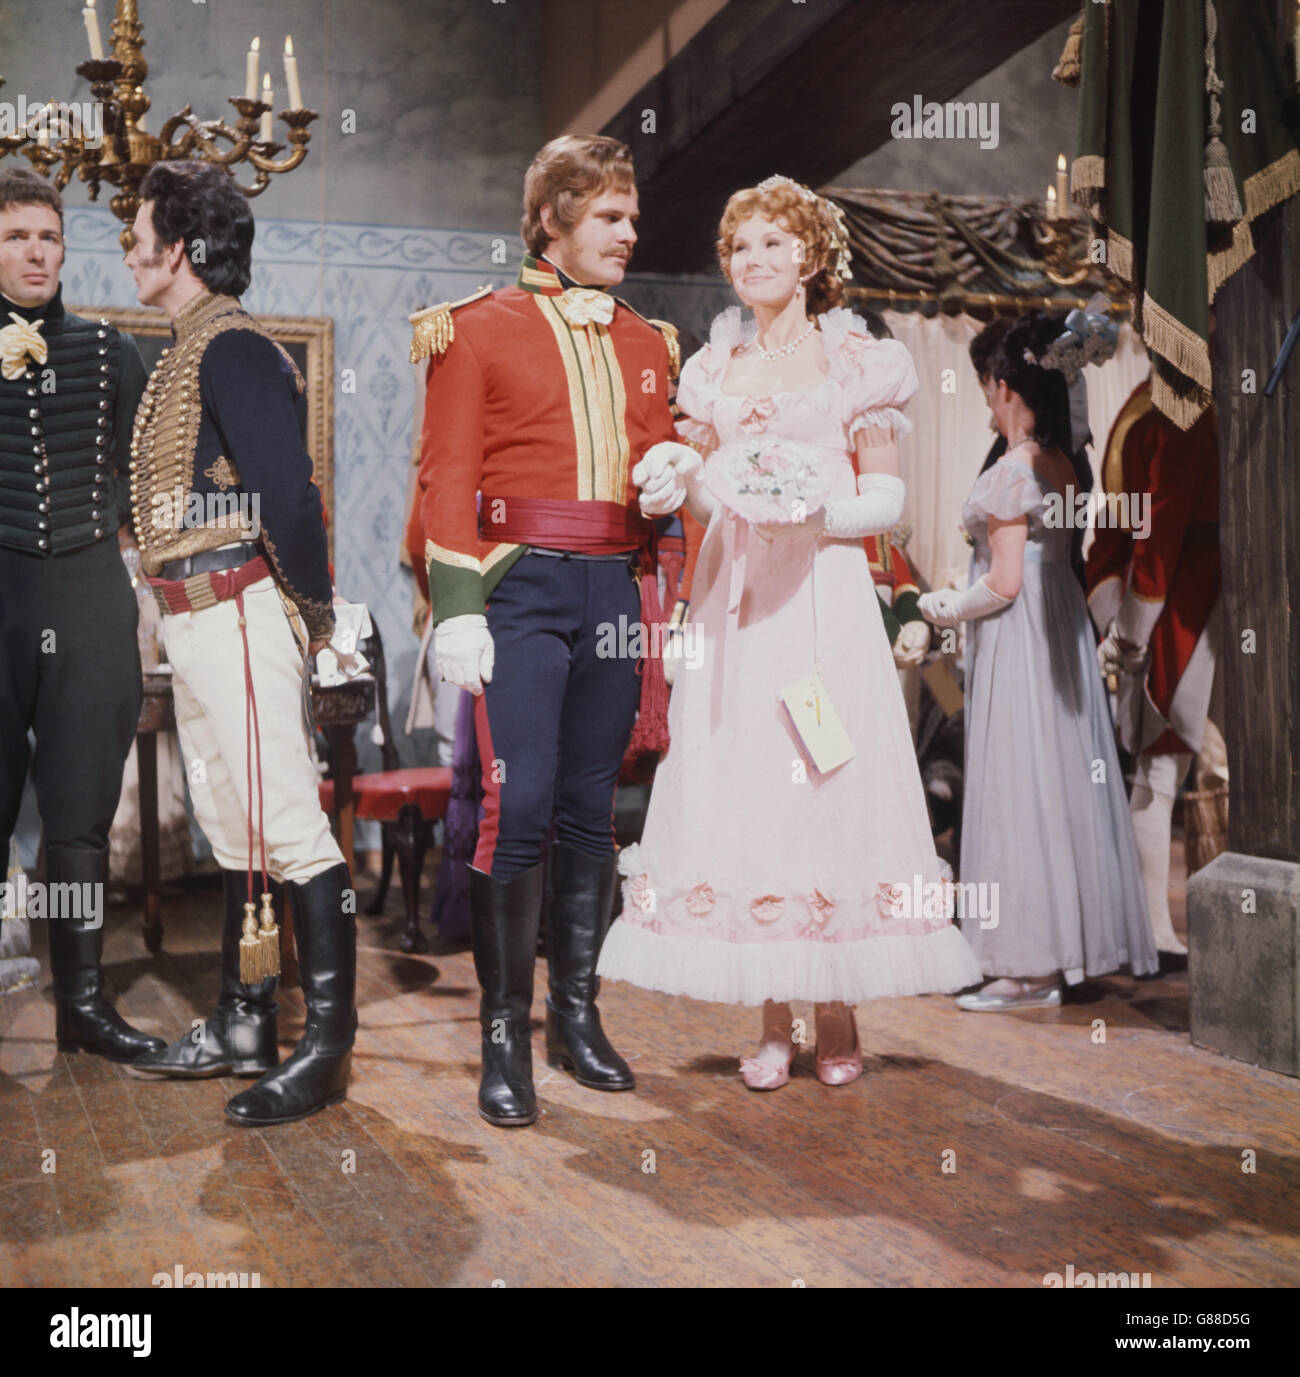 Actress Susan Hampshire (Becky Sharp), Dyson Lovell (Rawdon Crawley), at the Duchess of Richmond ball on the eve of Waterloo, one of the scenes from 'Vanity Fair', a BBC 2 production which will be shown in full colour. The scenes are being filmed at Ealing Studios, London. Stock Photo